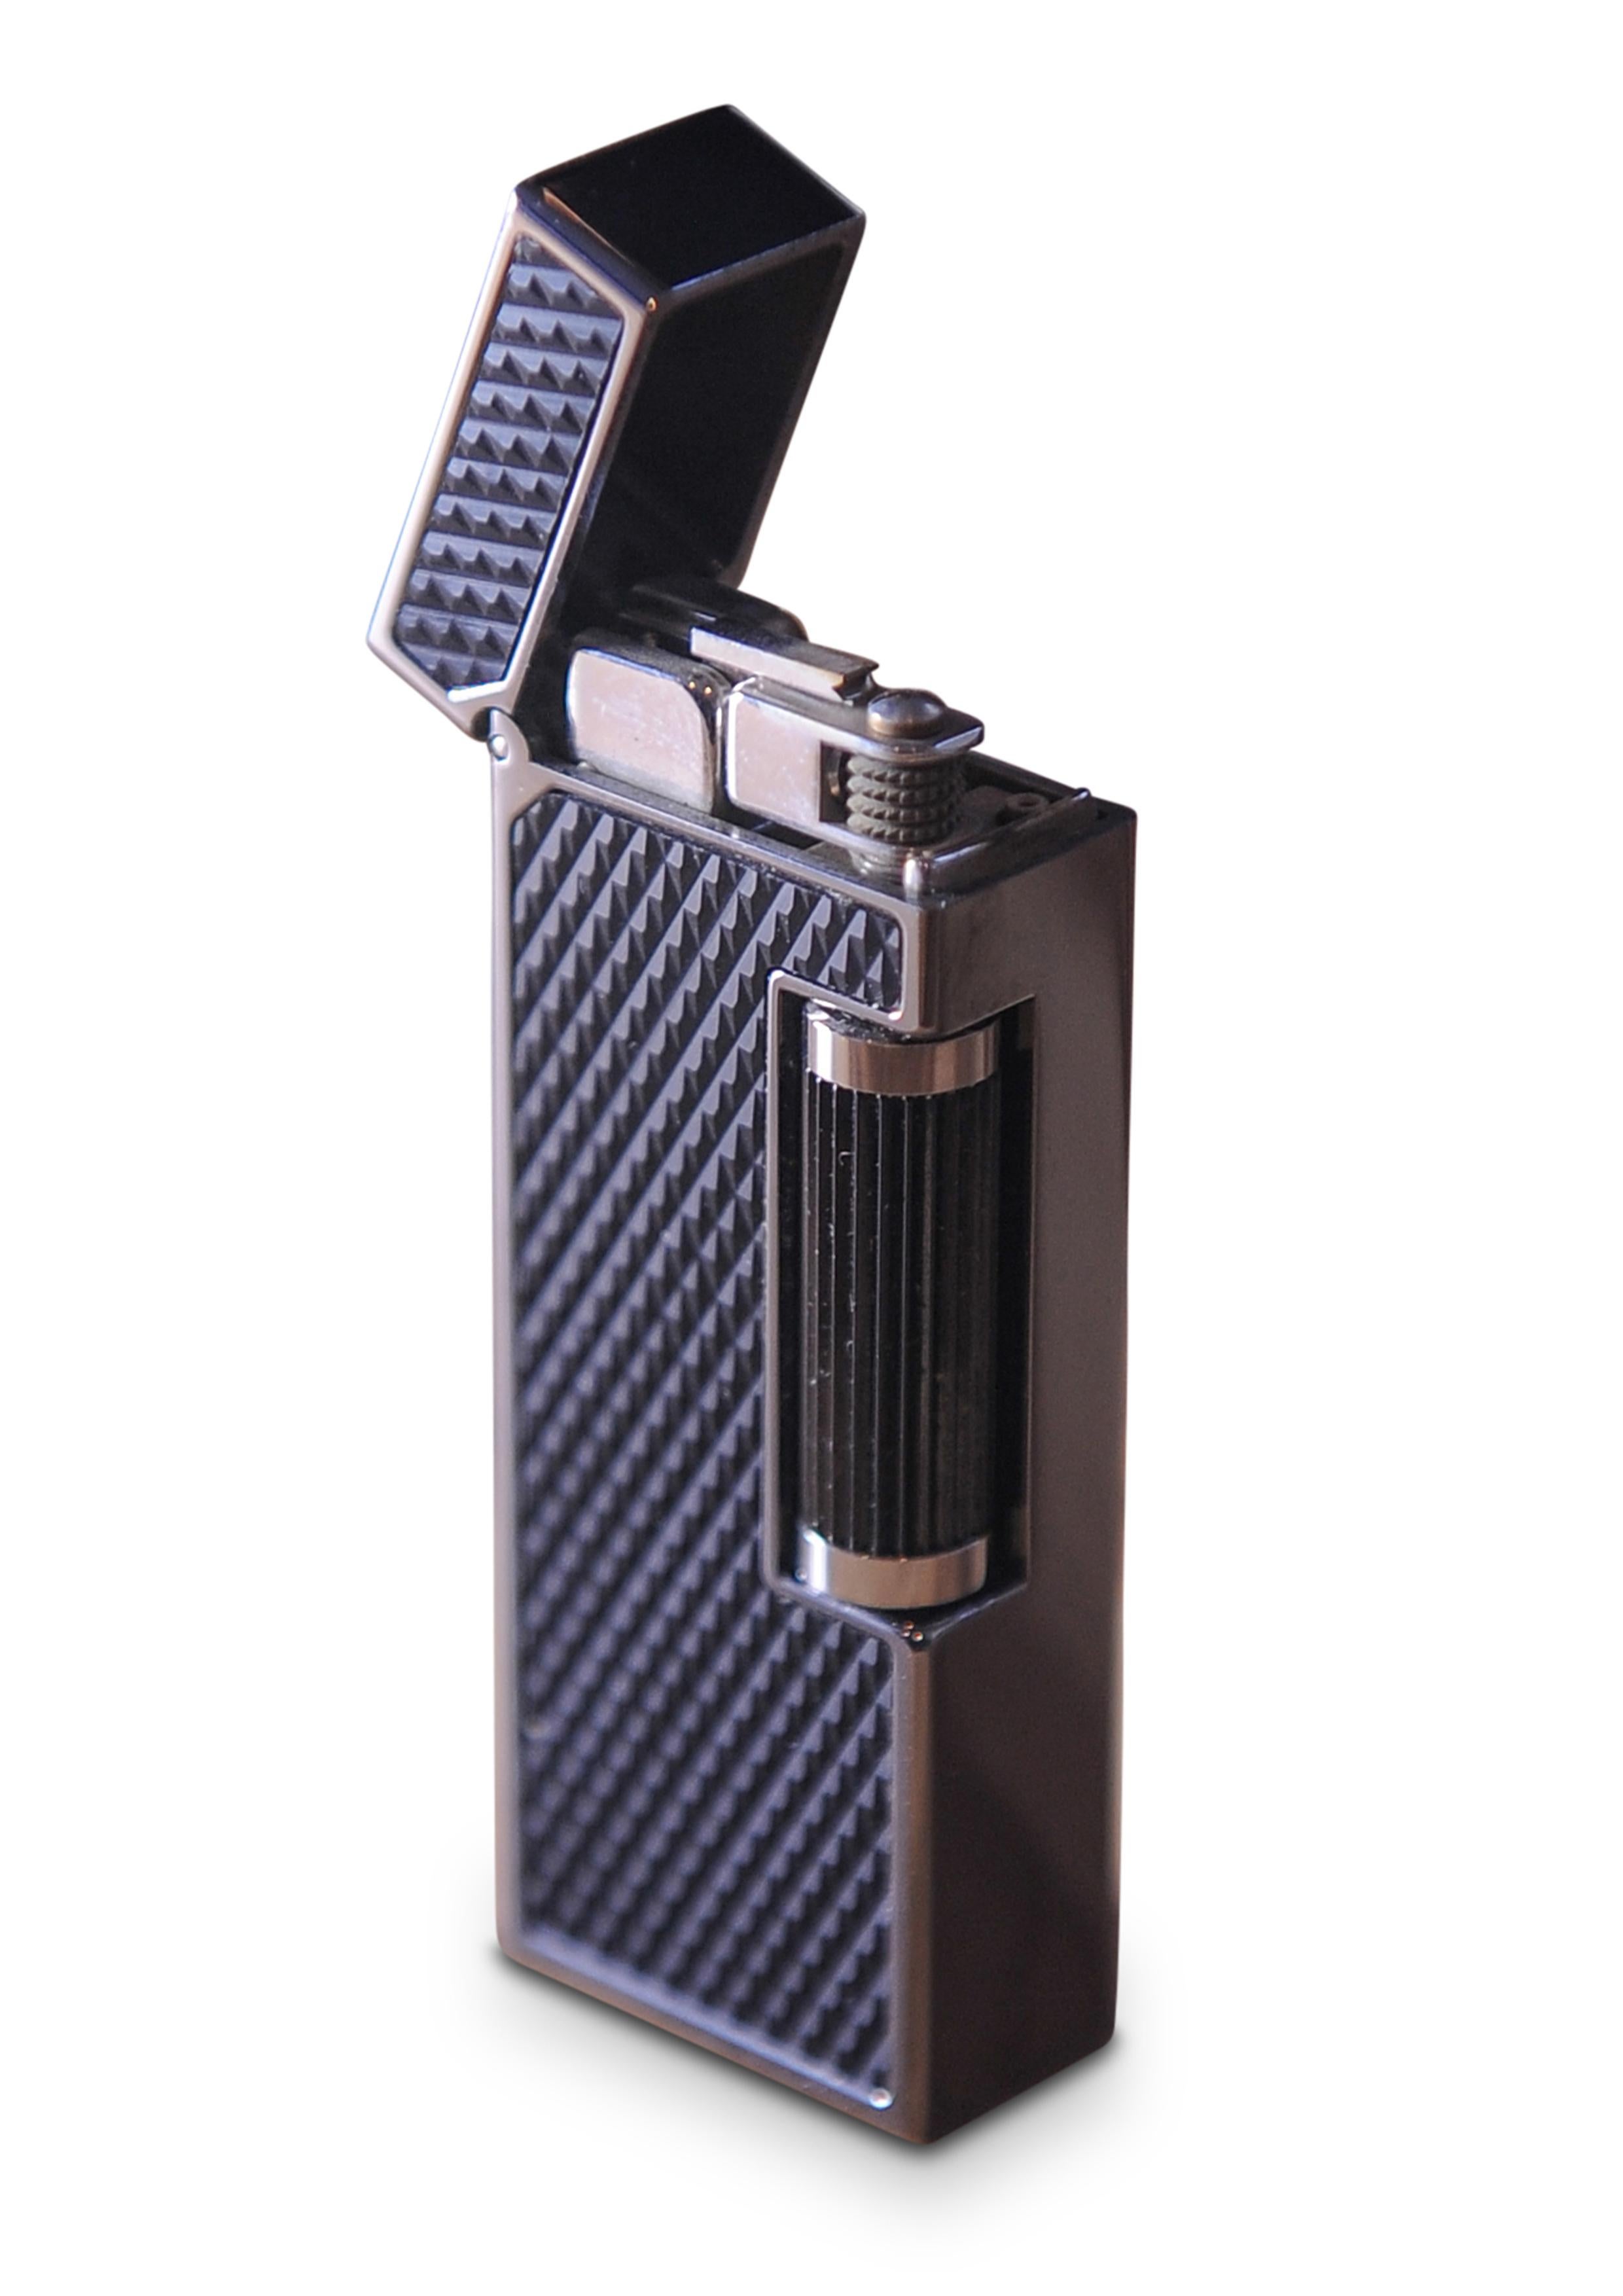 Alfred Dunhill Carbon Fibre Palladium Plated Rollagas Cigarette Lighter With Original Box, Papers & Sleeve Near Mint 
Black Resin D Pattern 

Stamped Dunhill & Swiss Made on Lighter Base


The Rollagas lighter is a dunhill classic, featuring